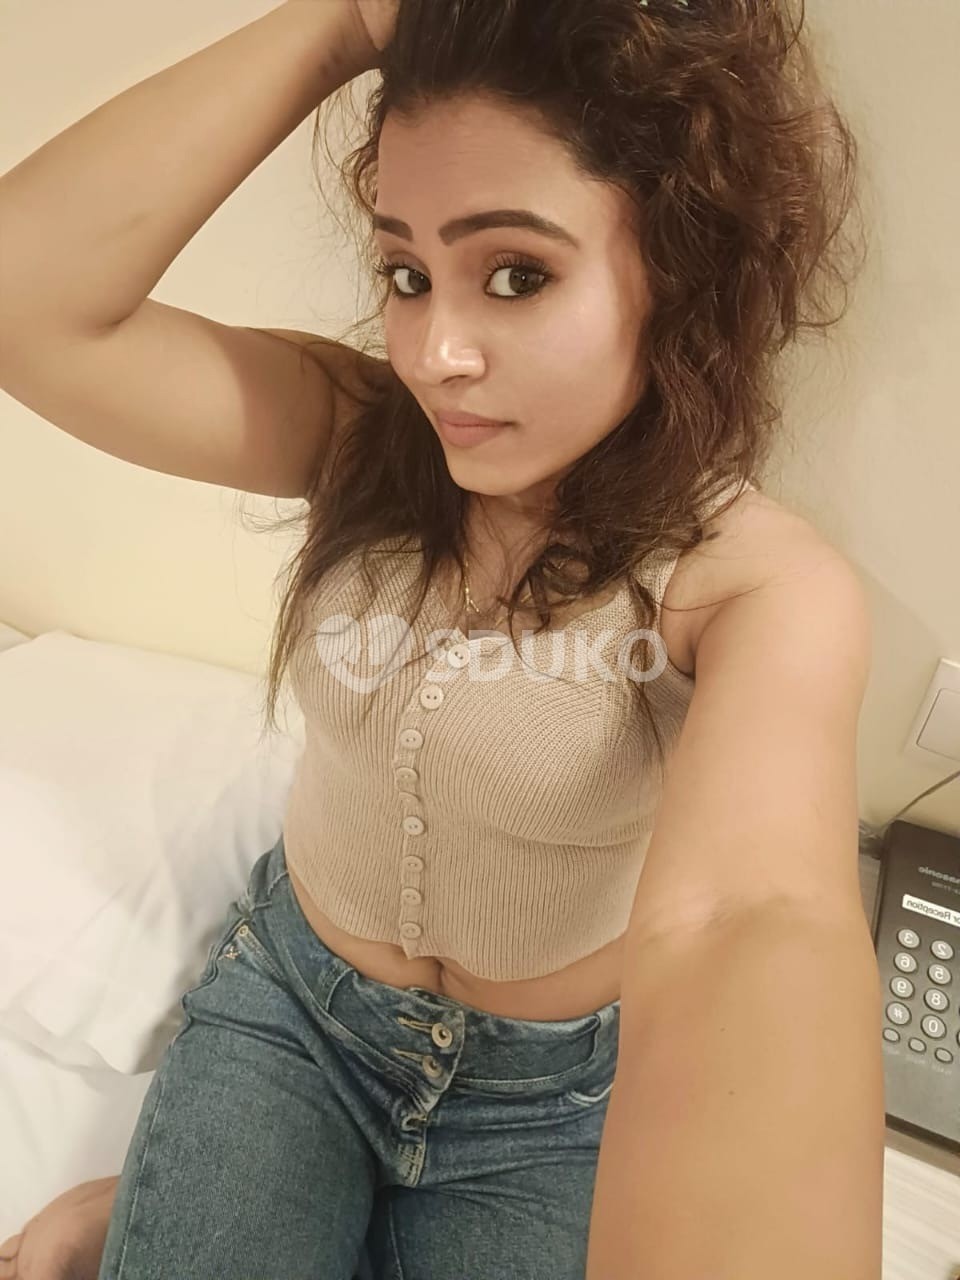 Mapusa vip call girl 24x7 service available ✅🥰 100% SAFE AND SECURE TODAY LOW PRICE UNLIMITED ENJOY HOT COLLEGE GIR